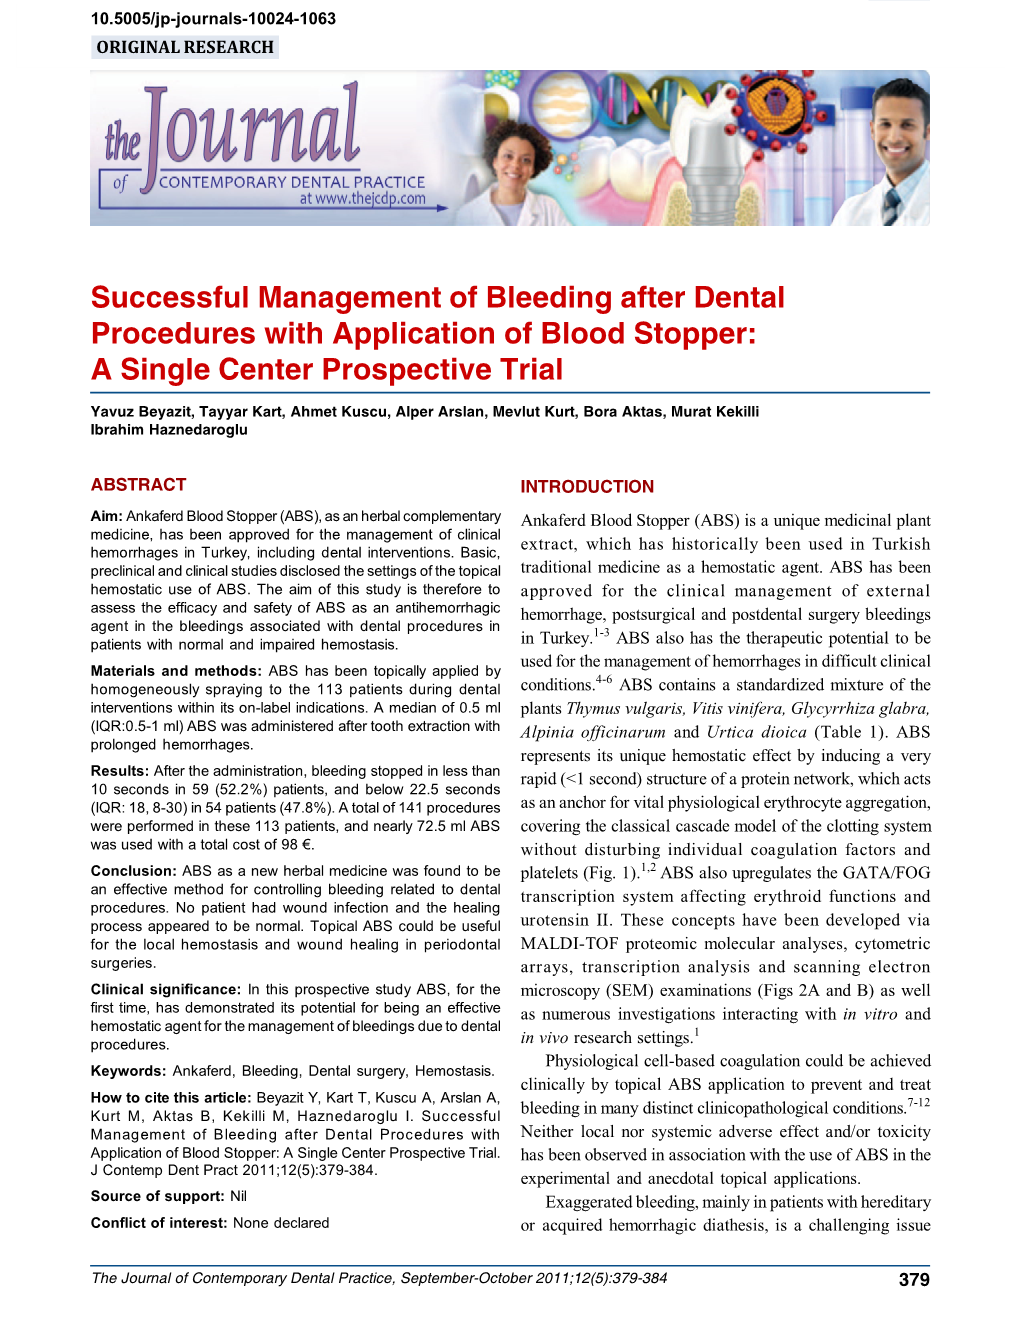 Successful Management of Bleeding After Dental Procedures with Application of Blood Stopper